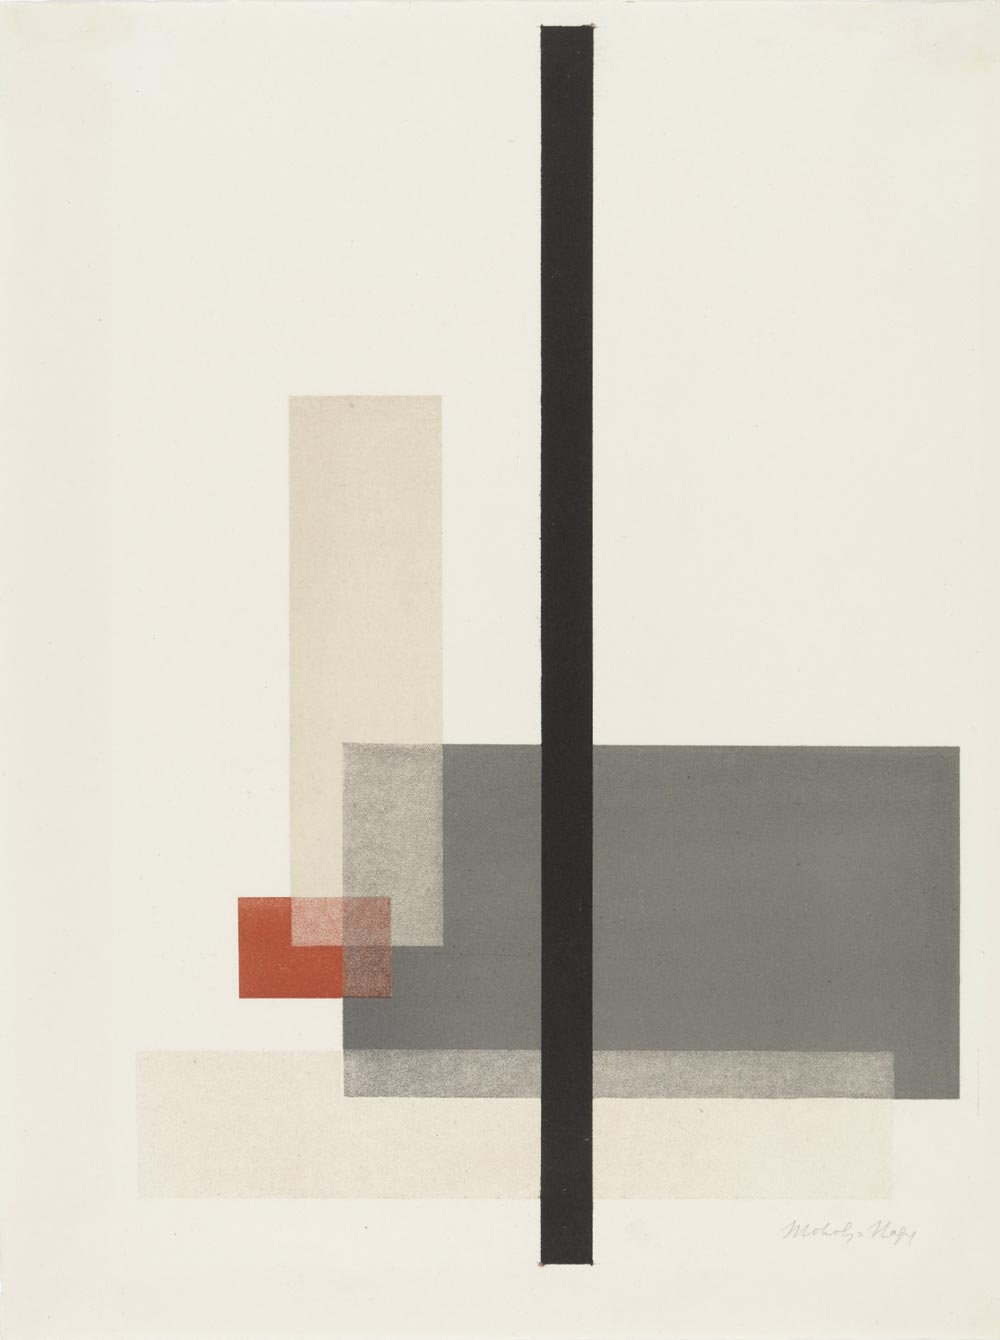 Composition from Masters' Portfolio of the Staatliches Bauhaus by László Moholy-Nagy (1923)